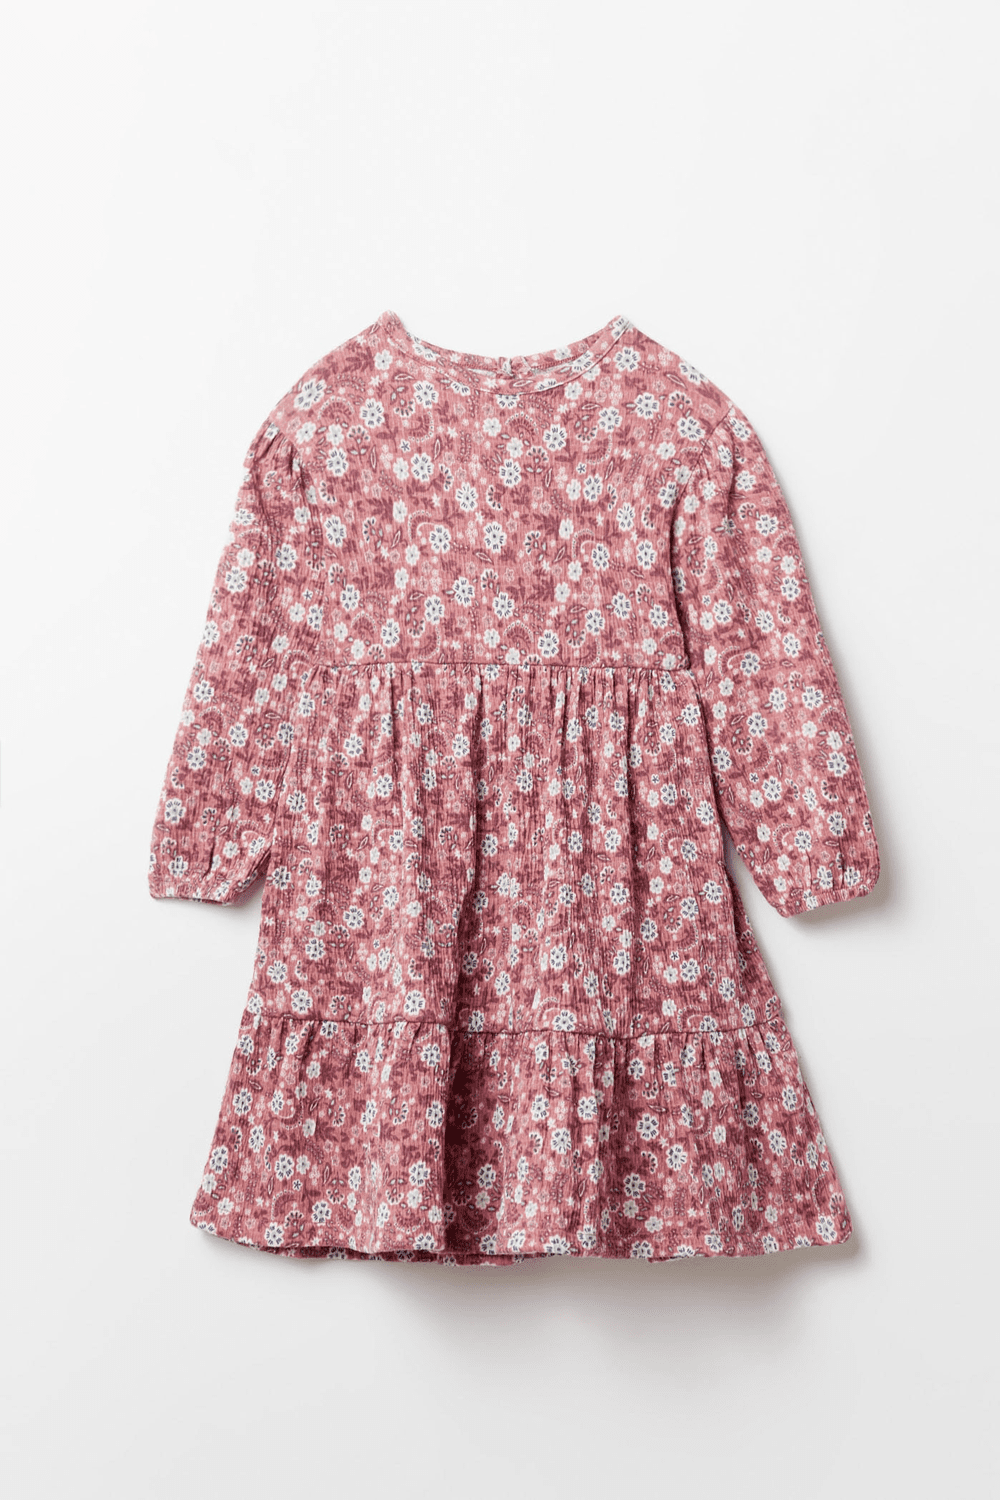 Sfera Floral Tiered Dress - Pink 1 Shaws Department Stores